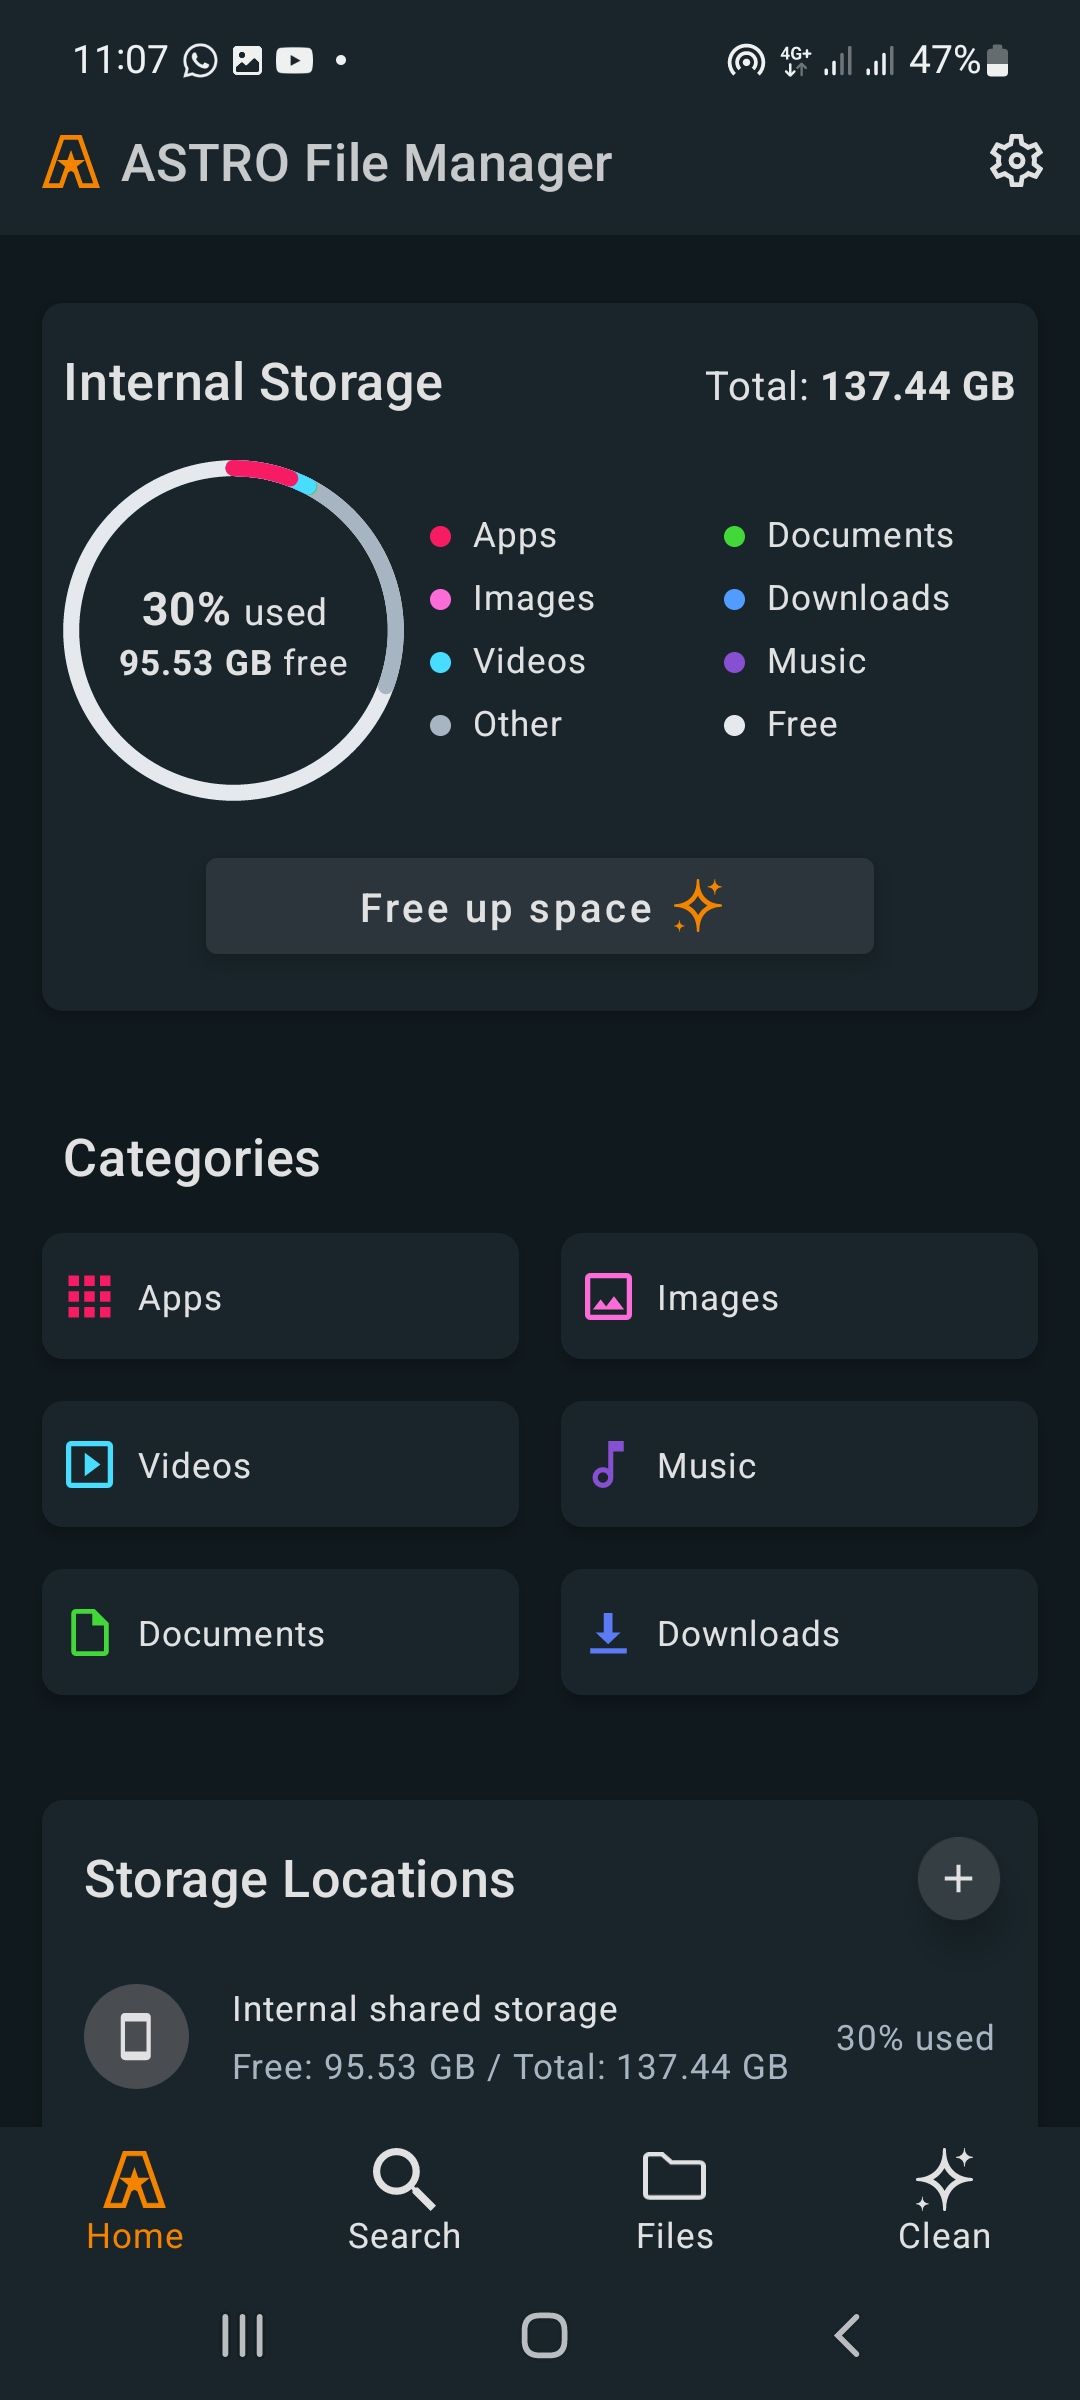 Screenshot showing ASTRO File Manager home